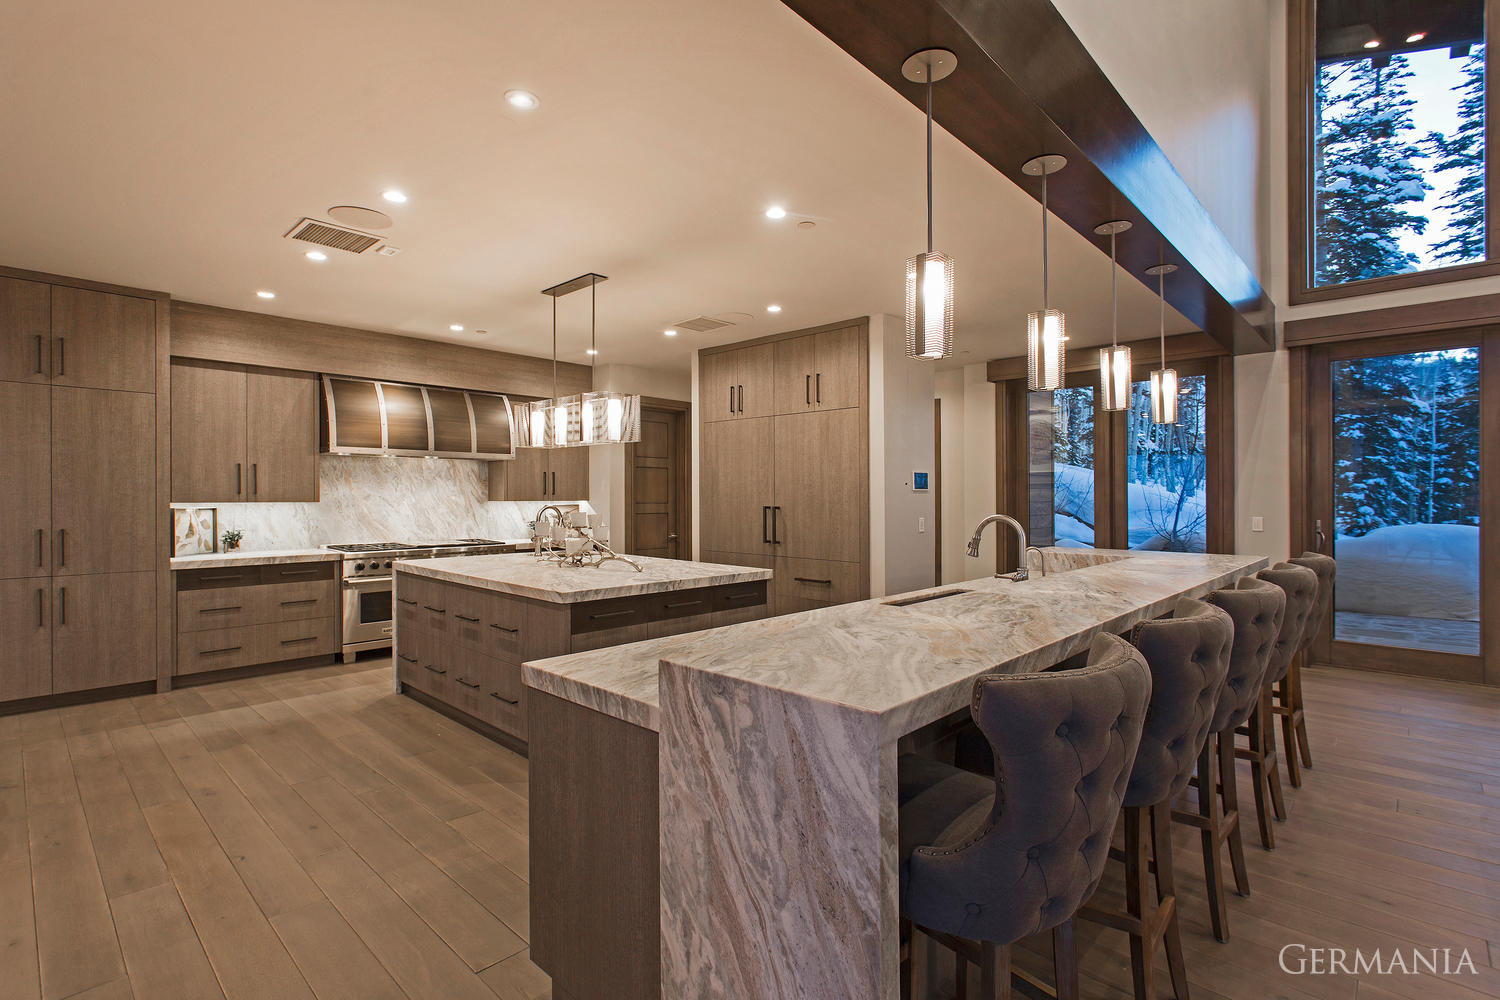 From the stone slab countertops to the meticulously designed wood floors, Germania Constructions custom house design for your kitchen brings mountain living to life.